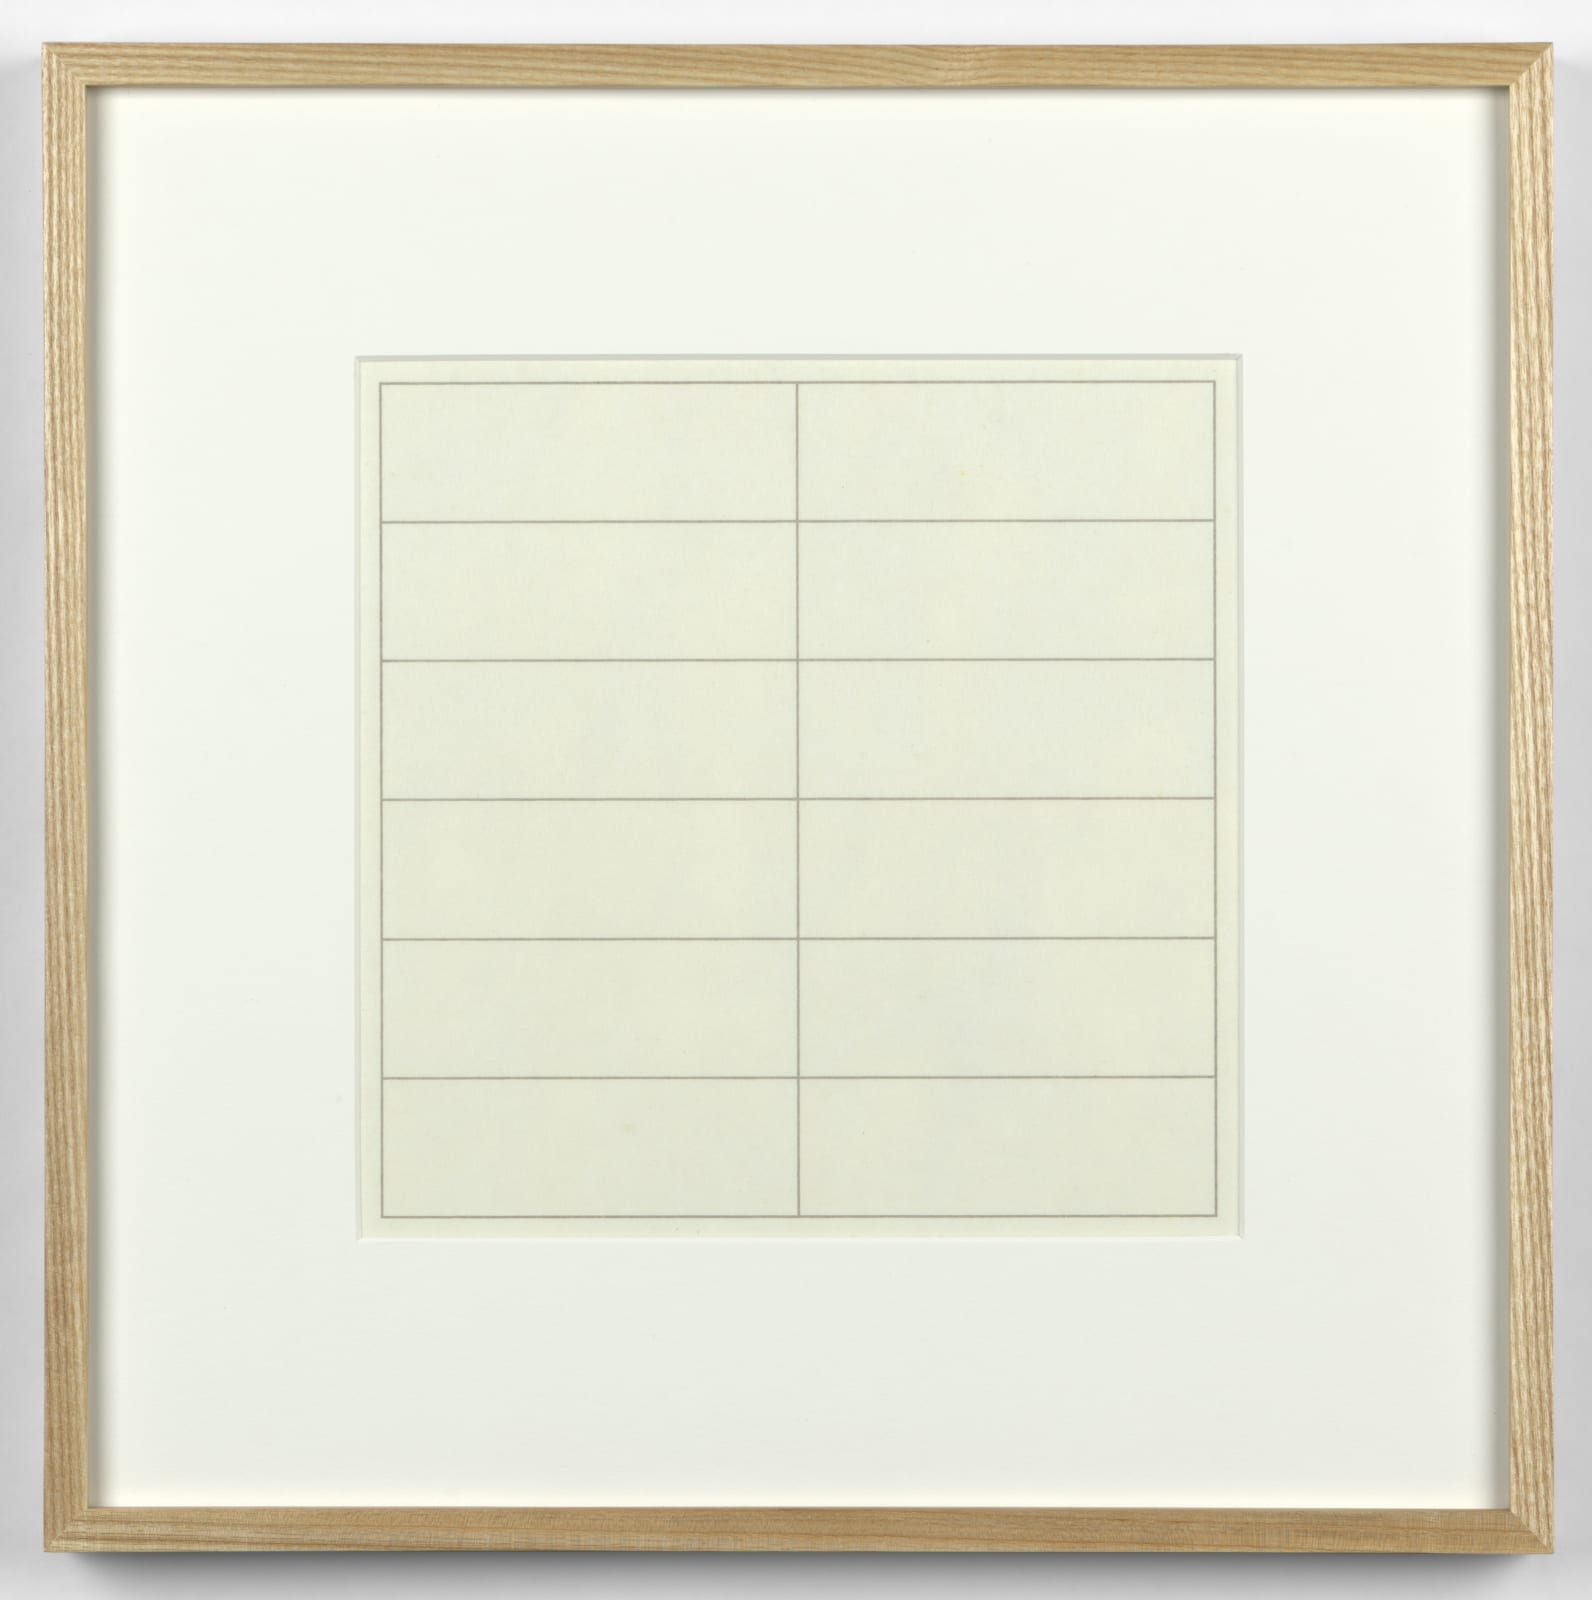 Agnes Martin, Untitled (On a Clear Day) #3, 1973